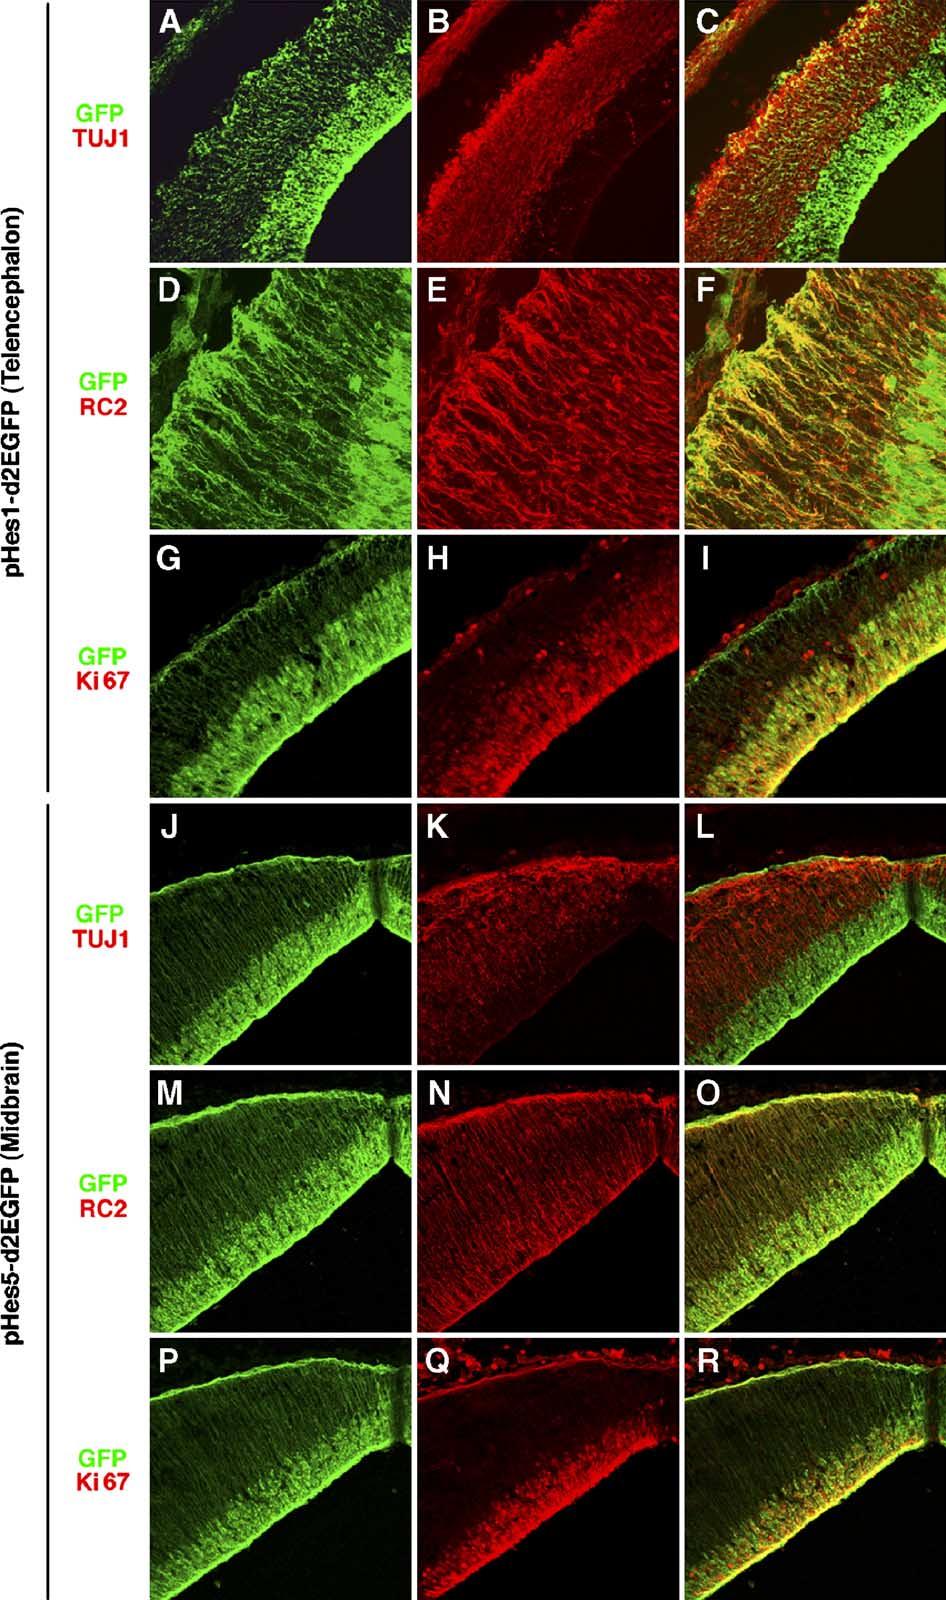 T. Ohtsuka et al. / Mol. Cell. Neurosci. 31 (2006) 109 122 113 Fig. 3. GFP is expressed by mitotically active VZ cells, including radial glia.